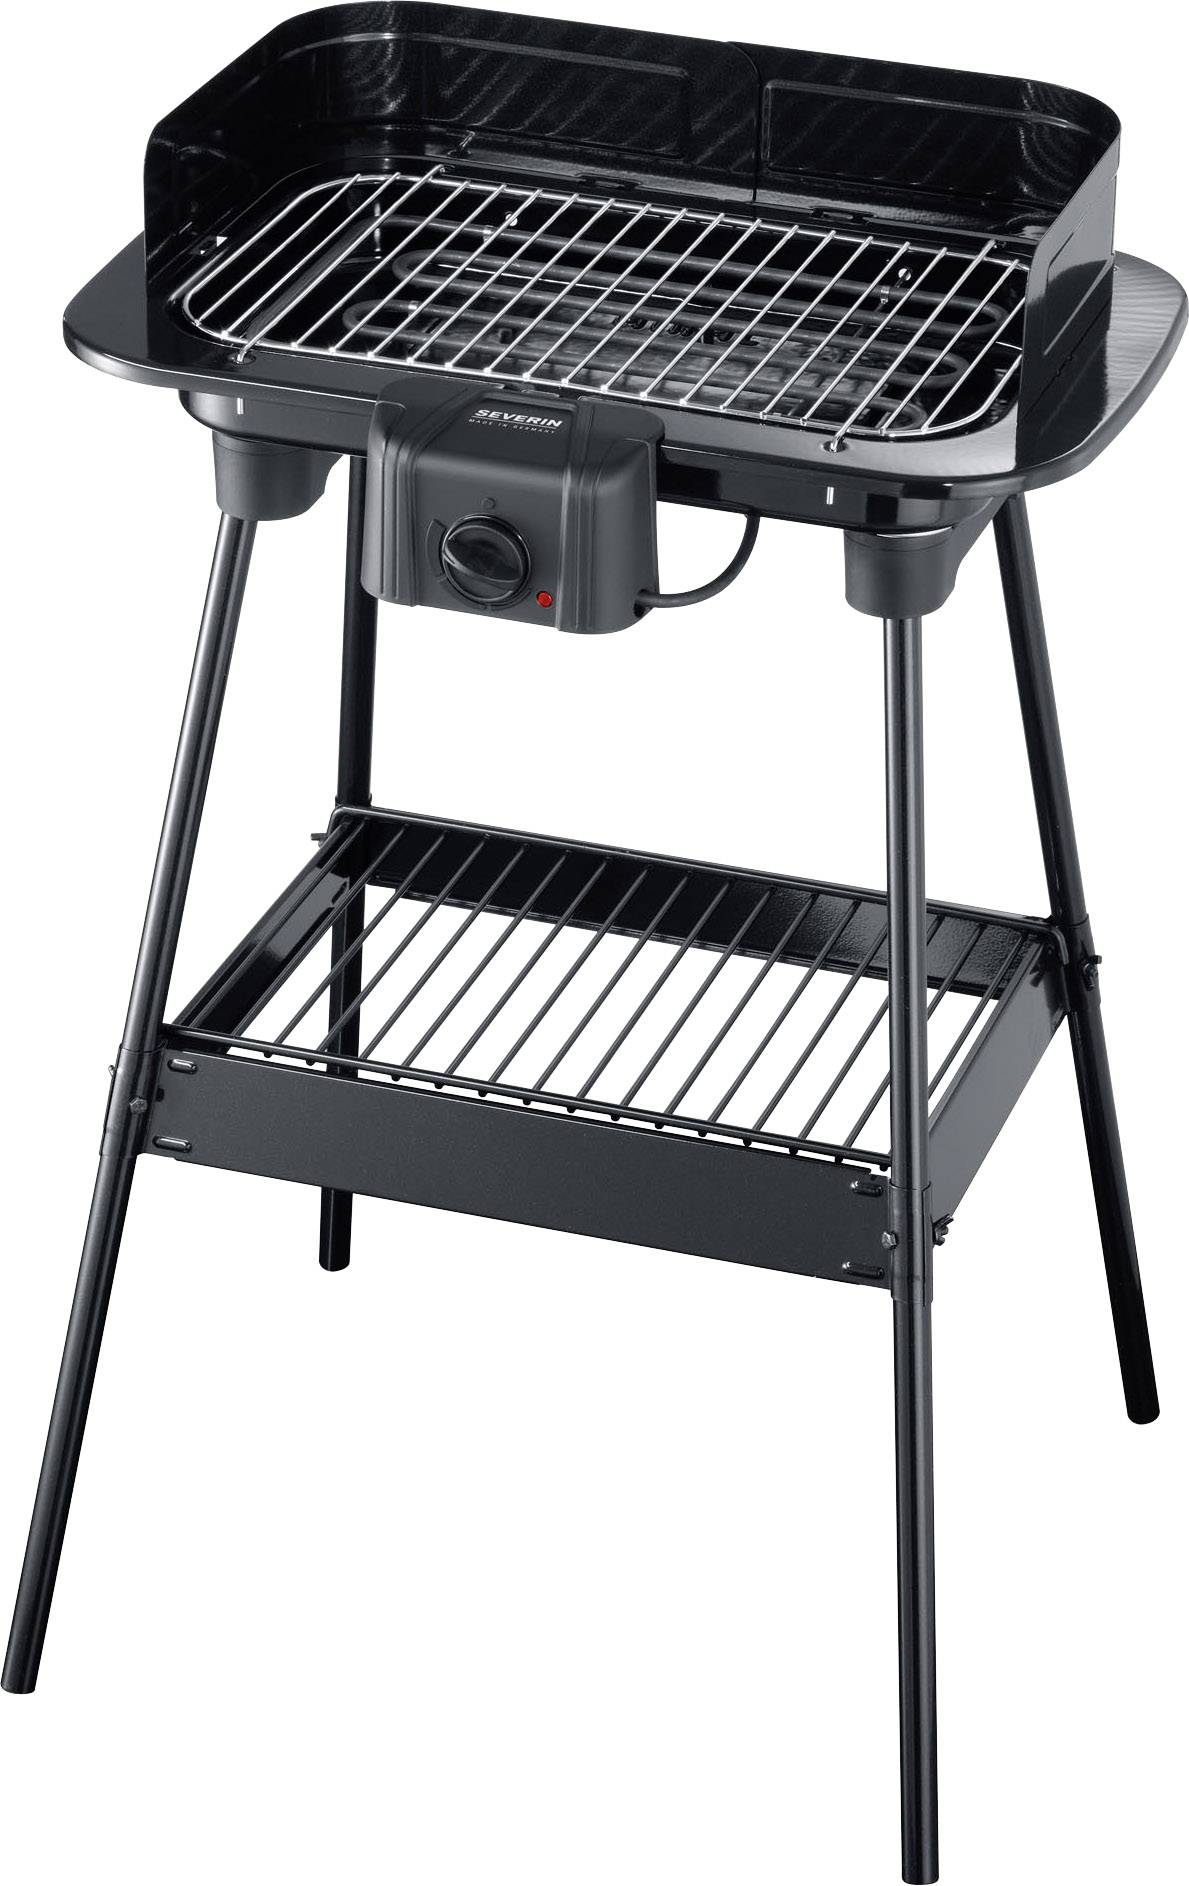 Haat buste plein Severin PG 8523 Standing BBQ Electric grill with wind protection, with  manual temperature settings Black | Conrad.com